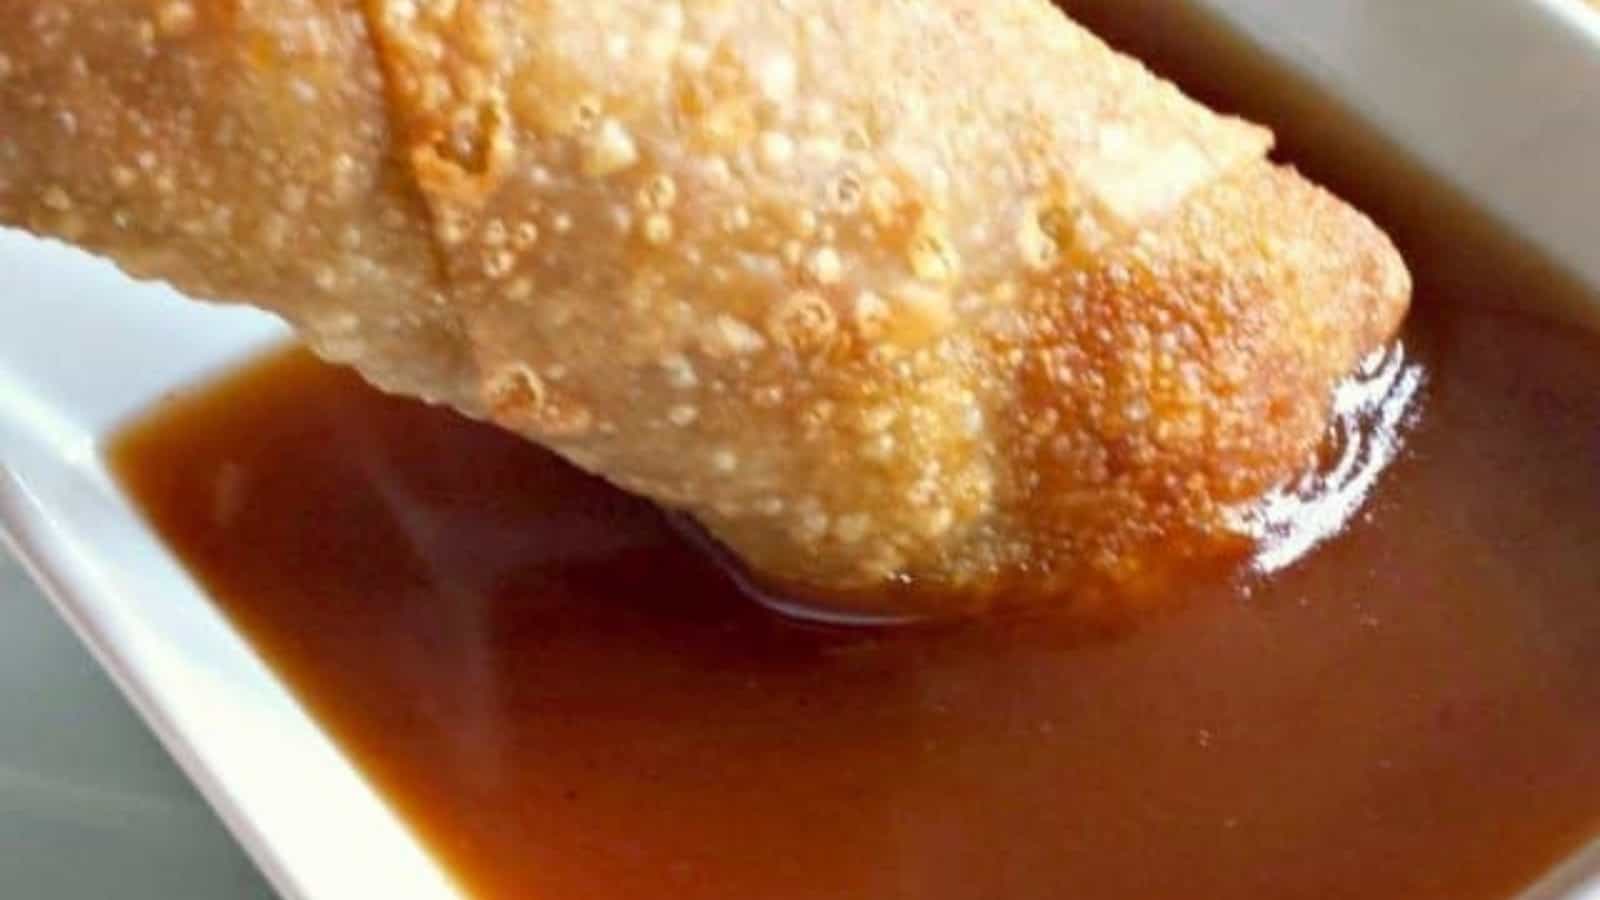 Image shows an Egg roll dipping into homemade sweet and sour sauce in a white bowl.